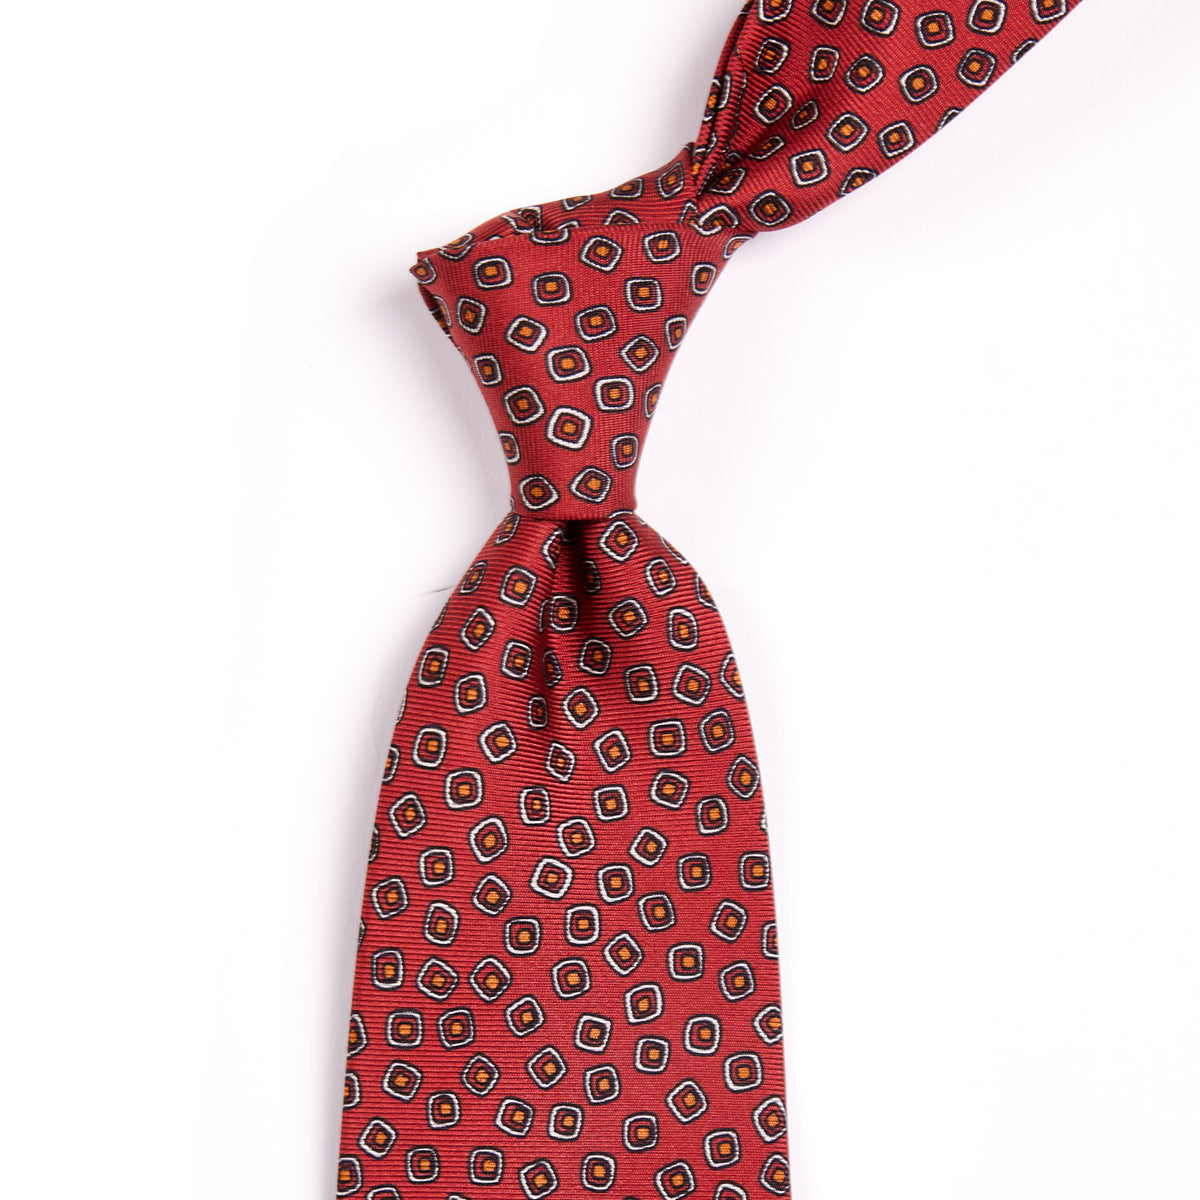 A highest quality Sovereign Grade Red Eton Printed Silk, 150cm tie with a handmade black and red pattern for longevity from KirbyAllison.com.